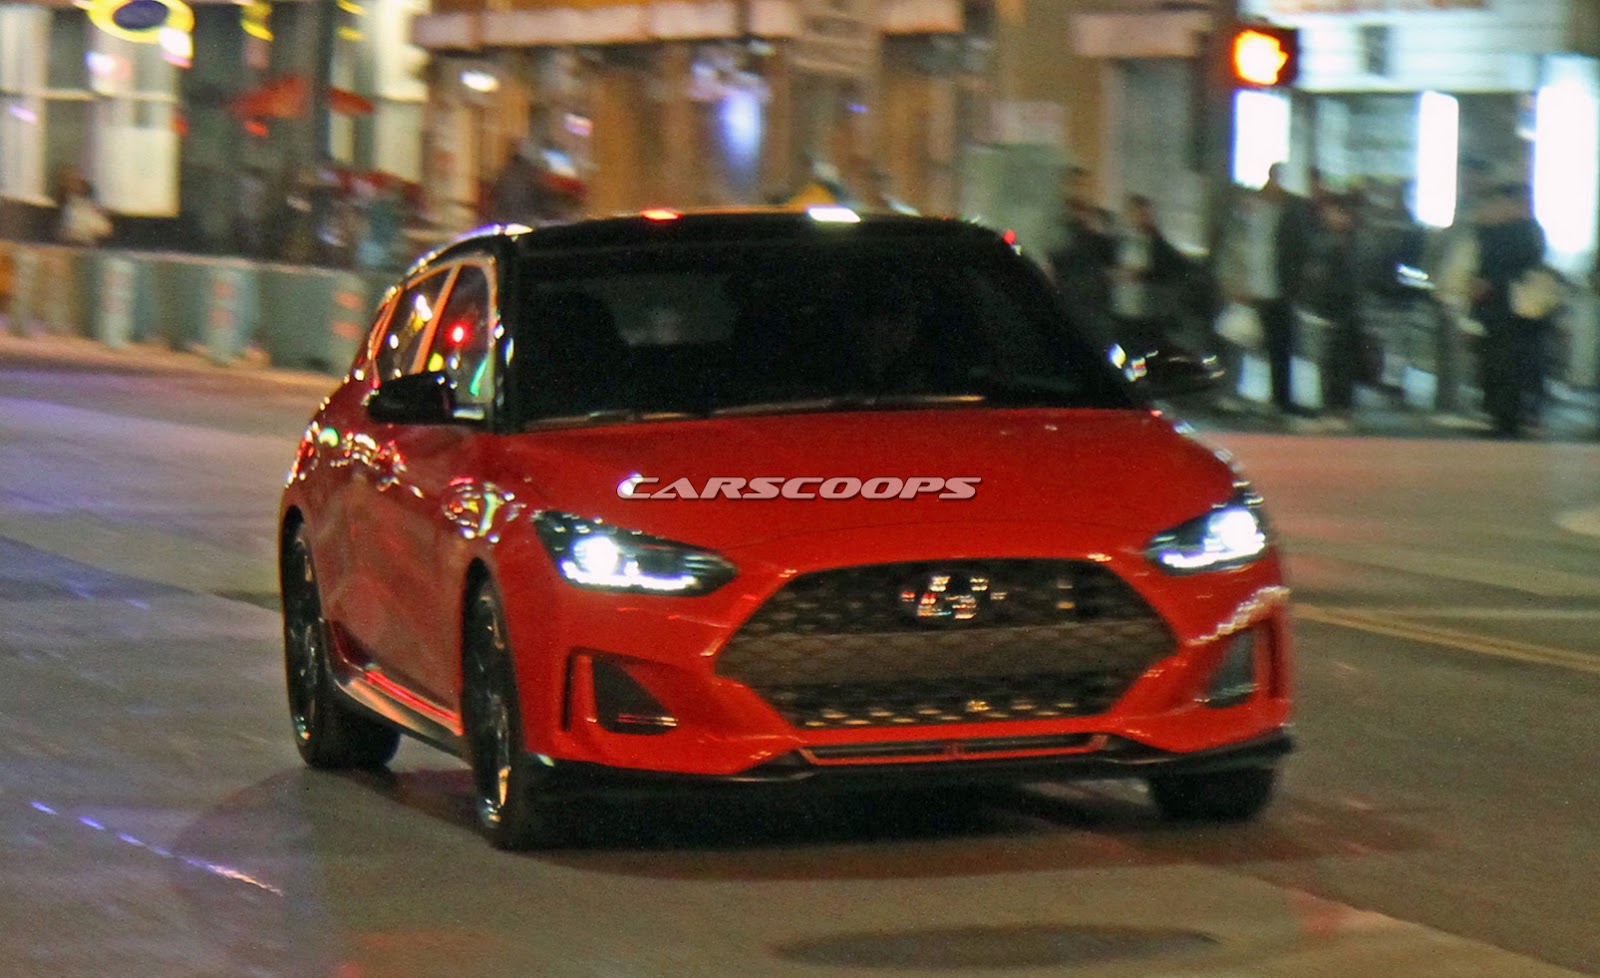 New 2019 Hyundai Veloster Spotted